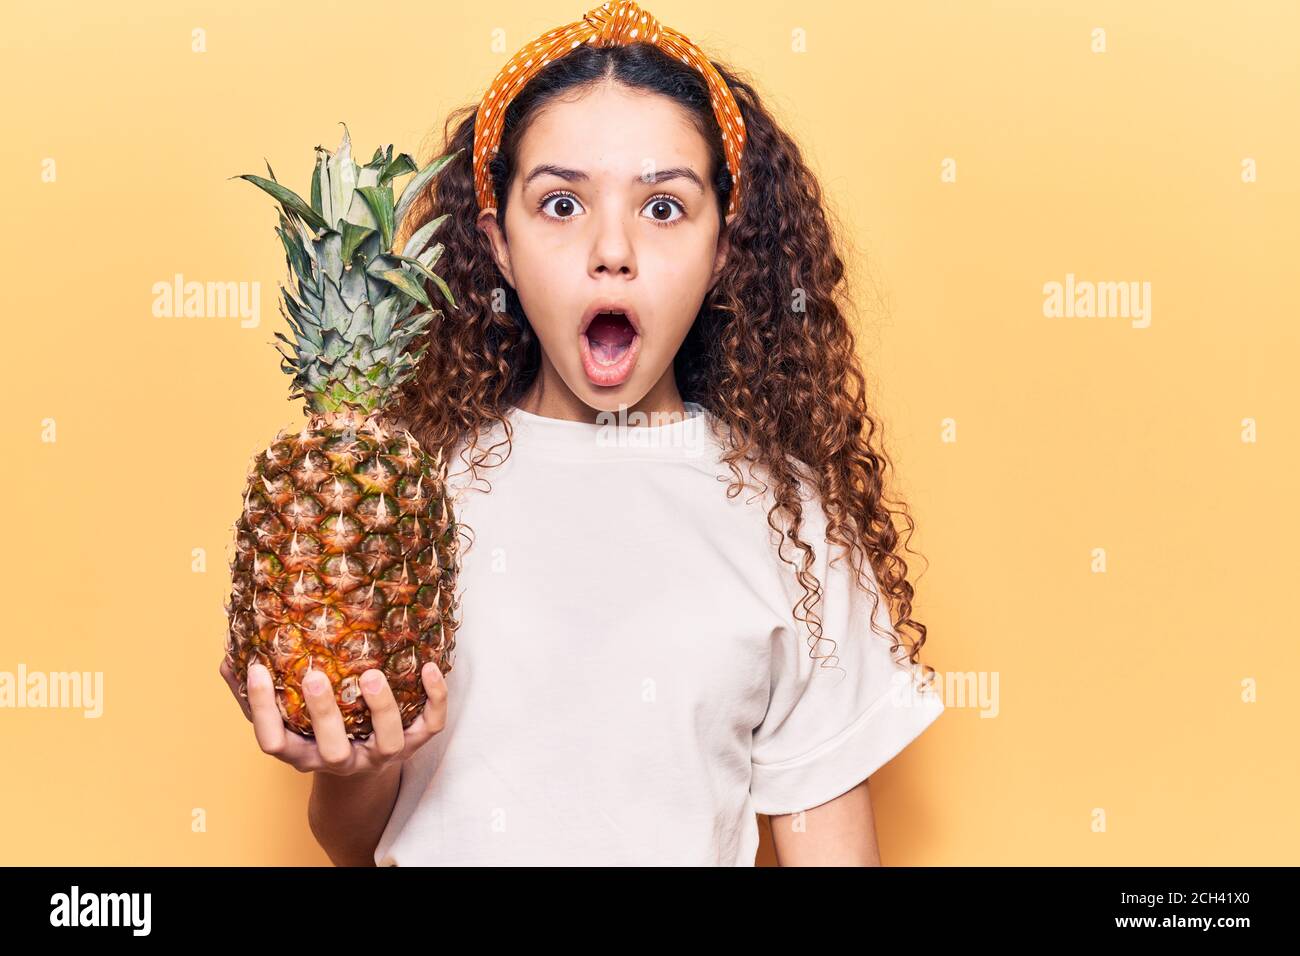 Beautiful kid girl with curly hair holding pineapple scared and amazed with  open mouth for surprise, disbelief face Stock Photo - Alamy